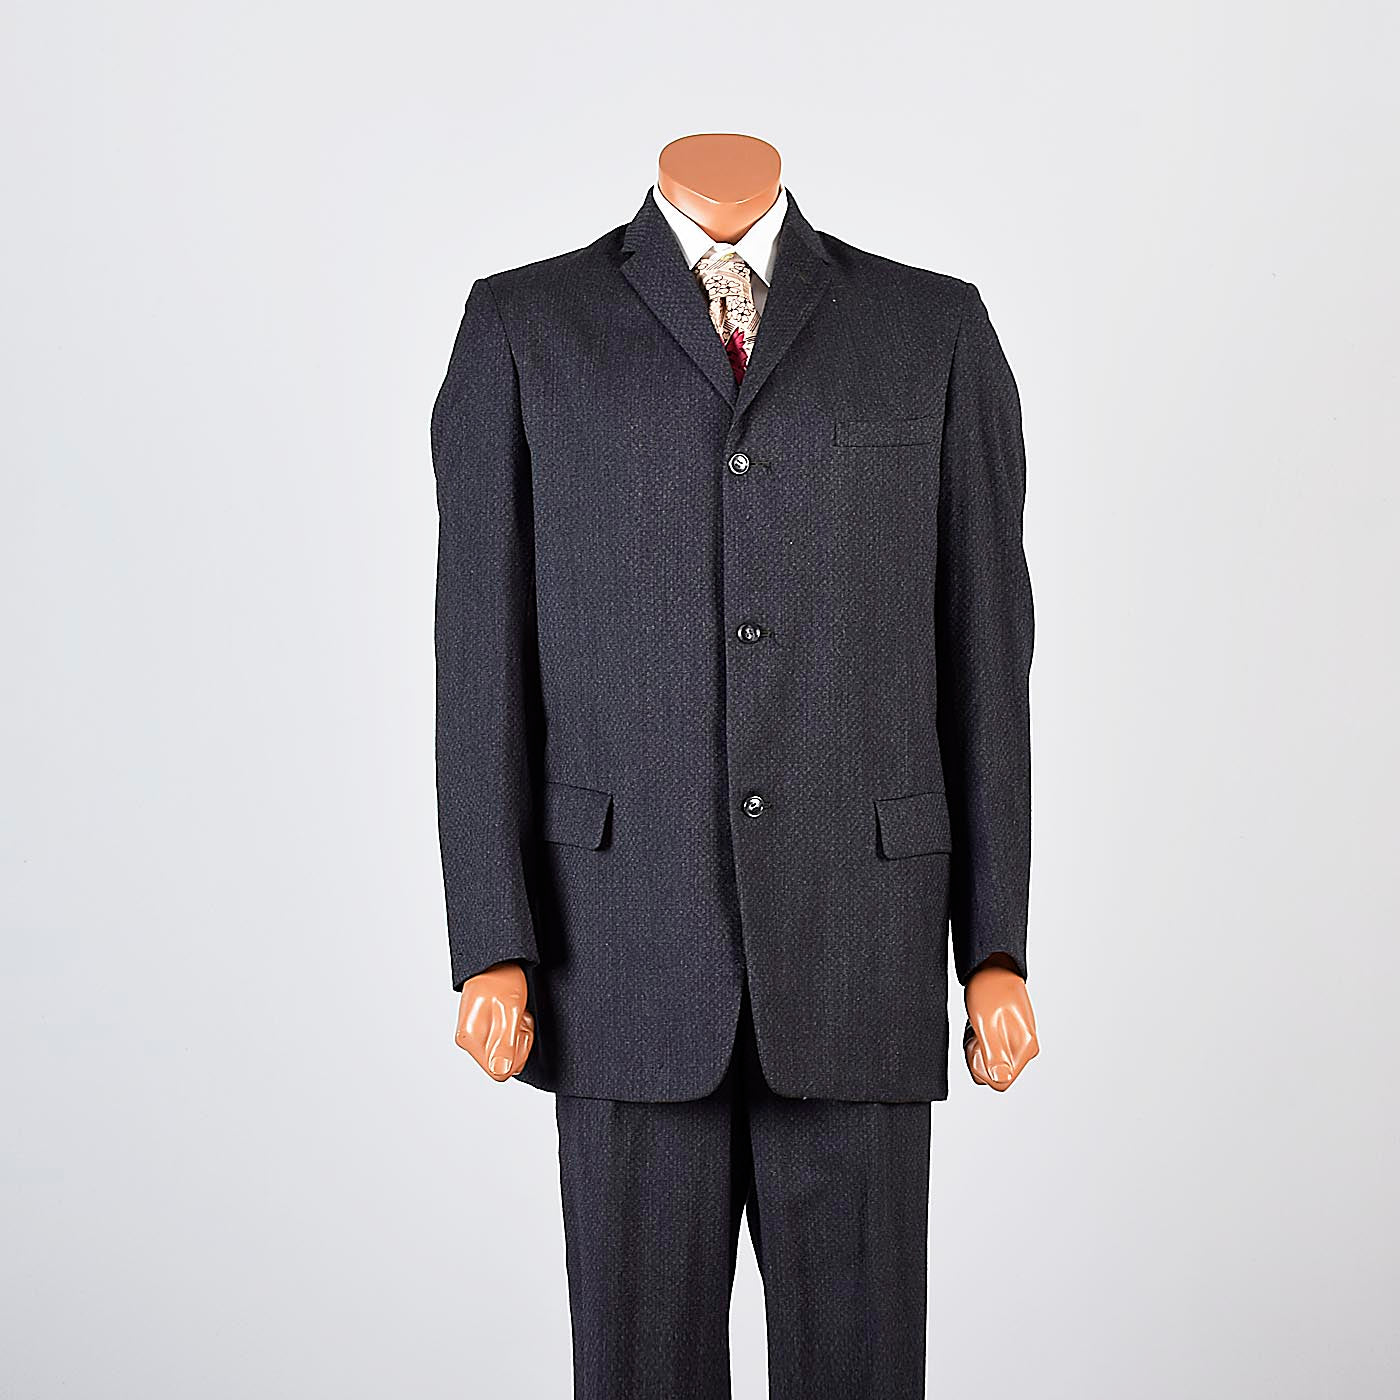 1950s Mens Two Piece Suit in Charcoal Gray